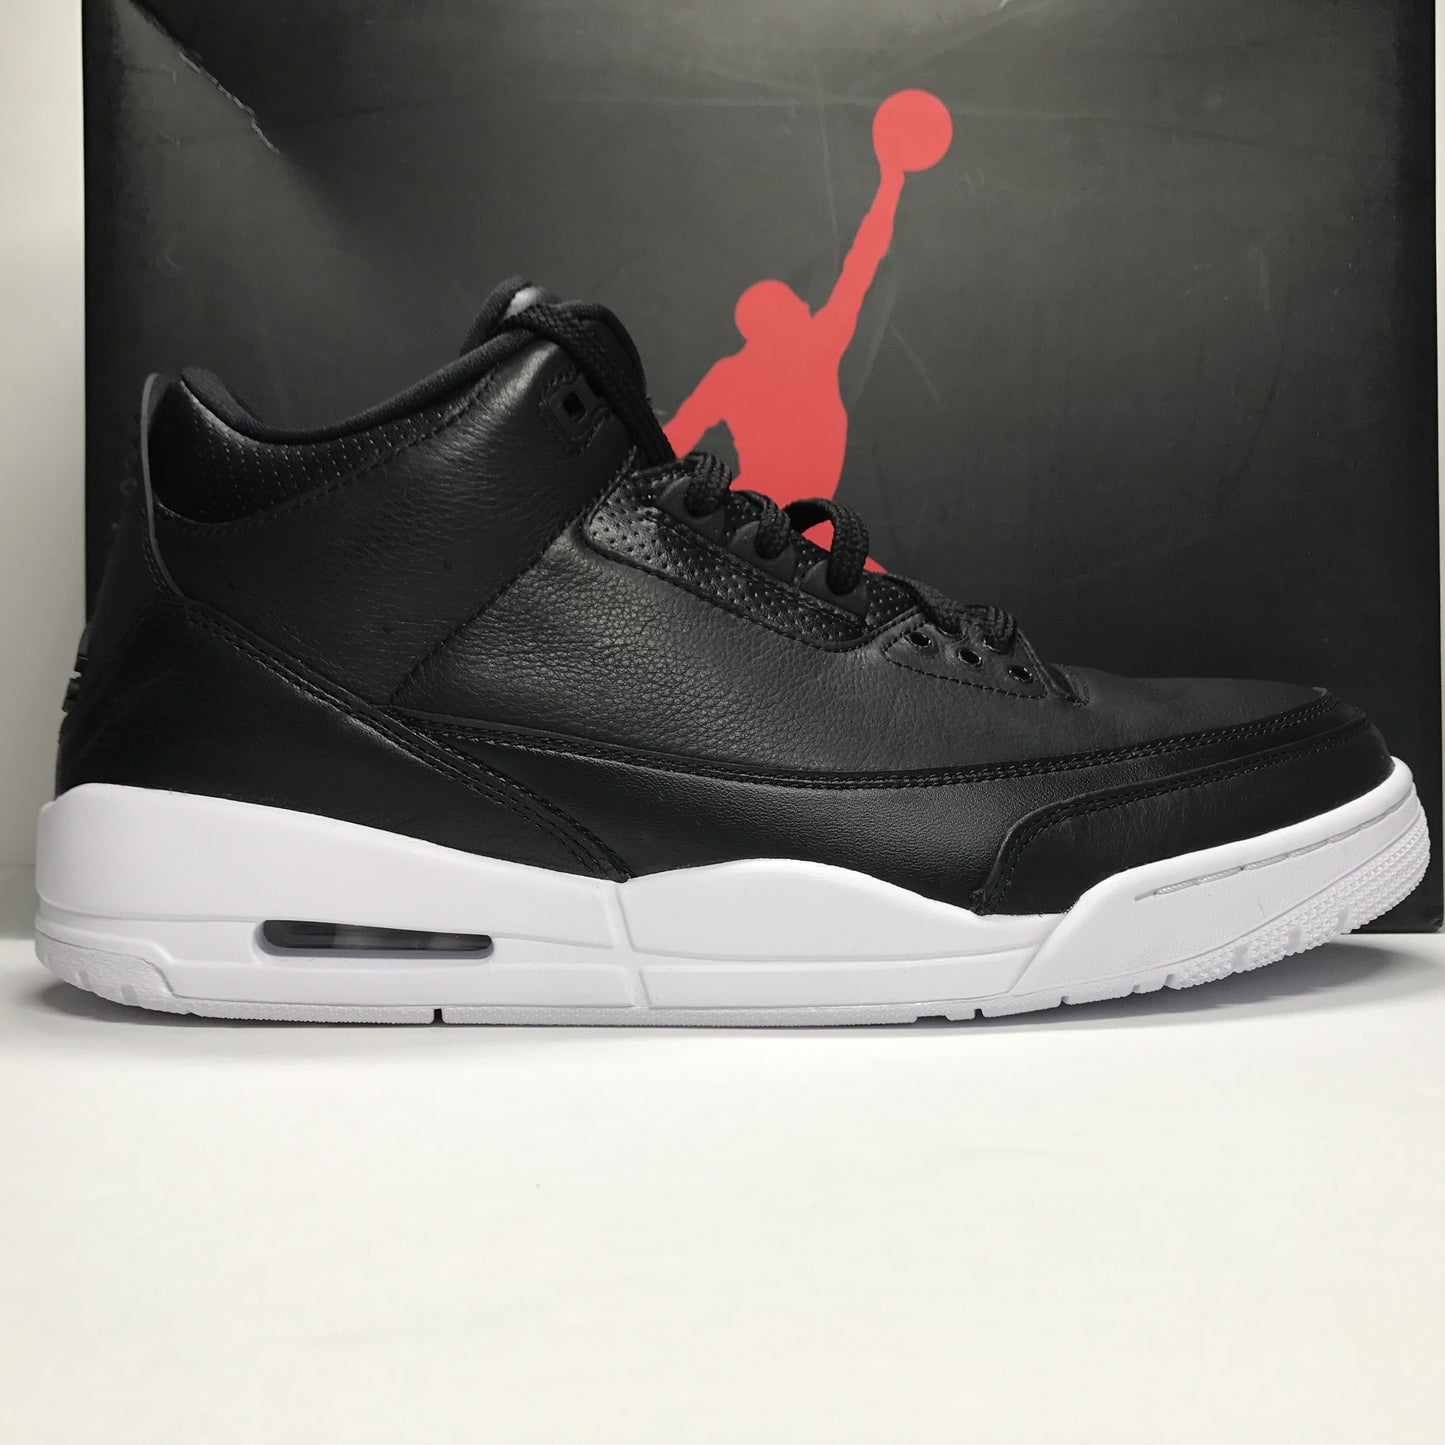 DS Nike Air Jordan 3 III Retro Cyber ​​Monday Taille 8.5/Taille 11/Taille 12